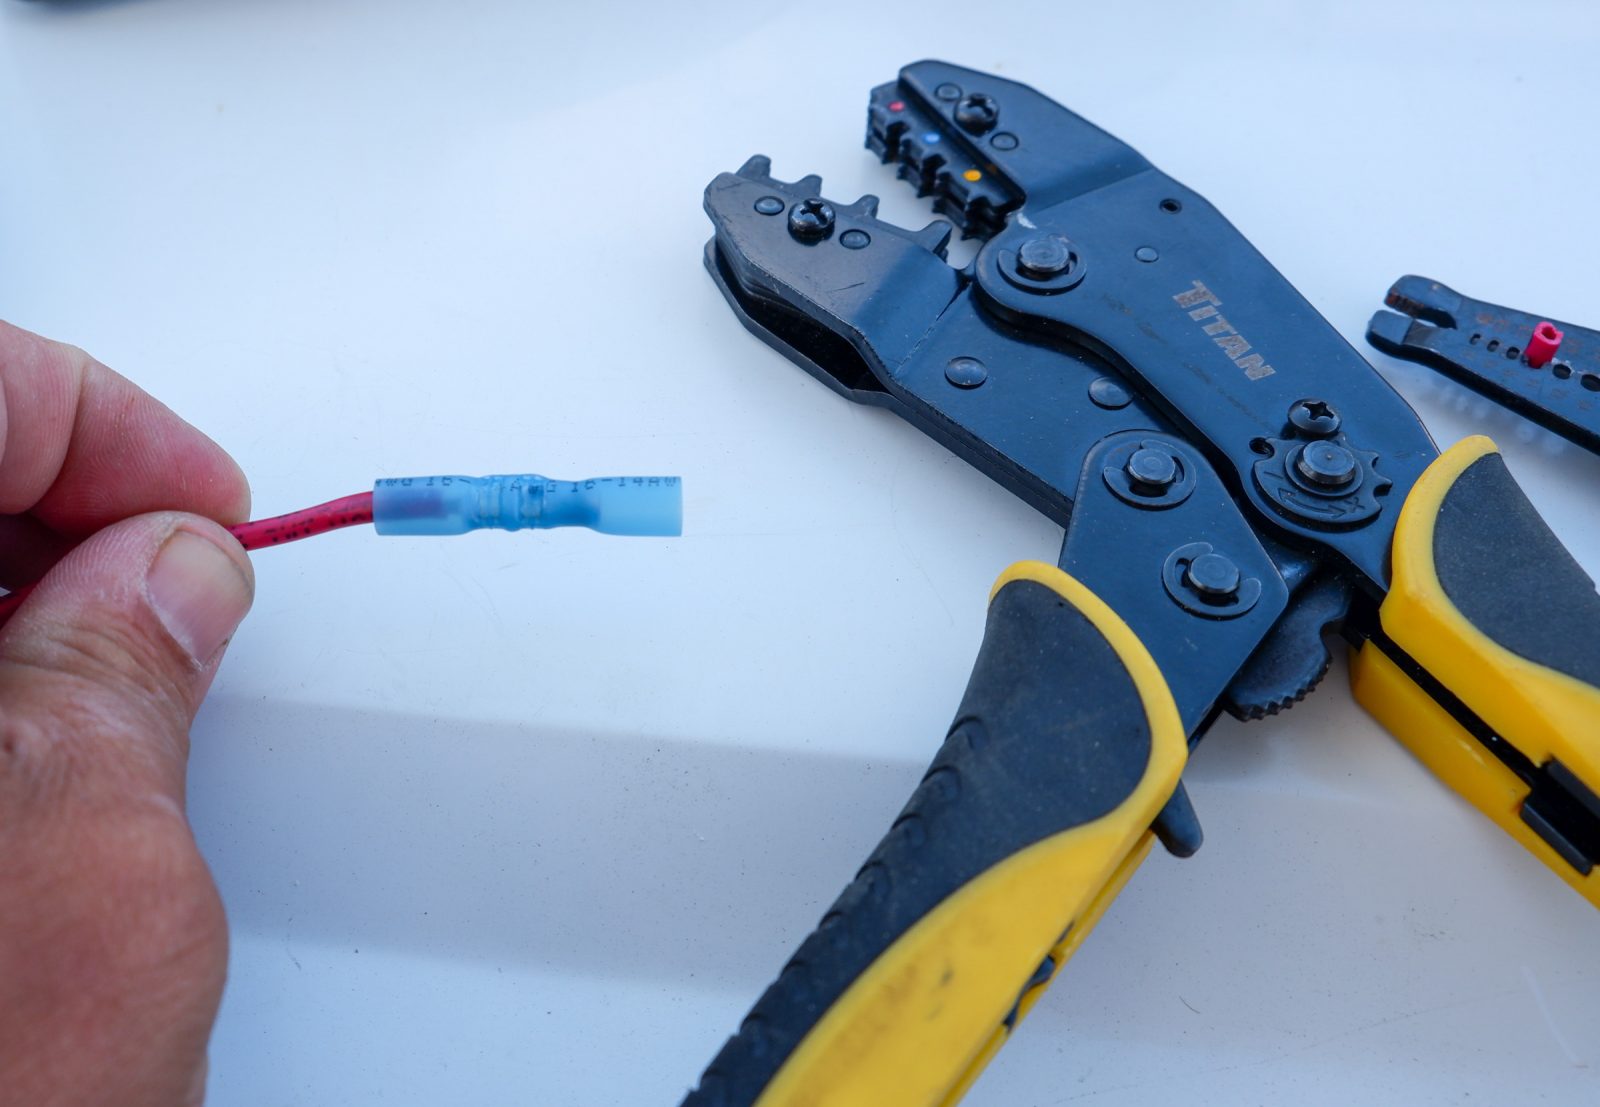 Quality crimp connections, the right tool makes all the difference - Panbo